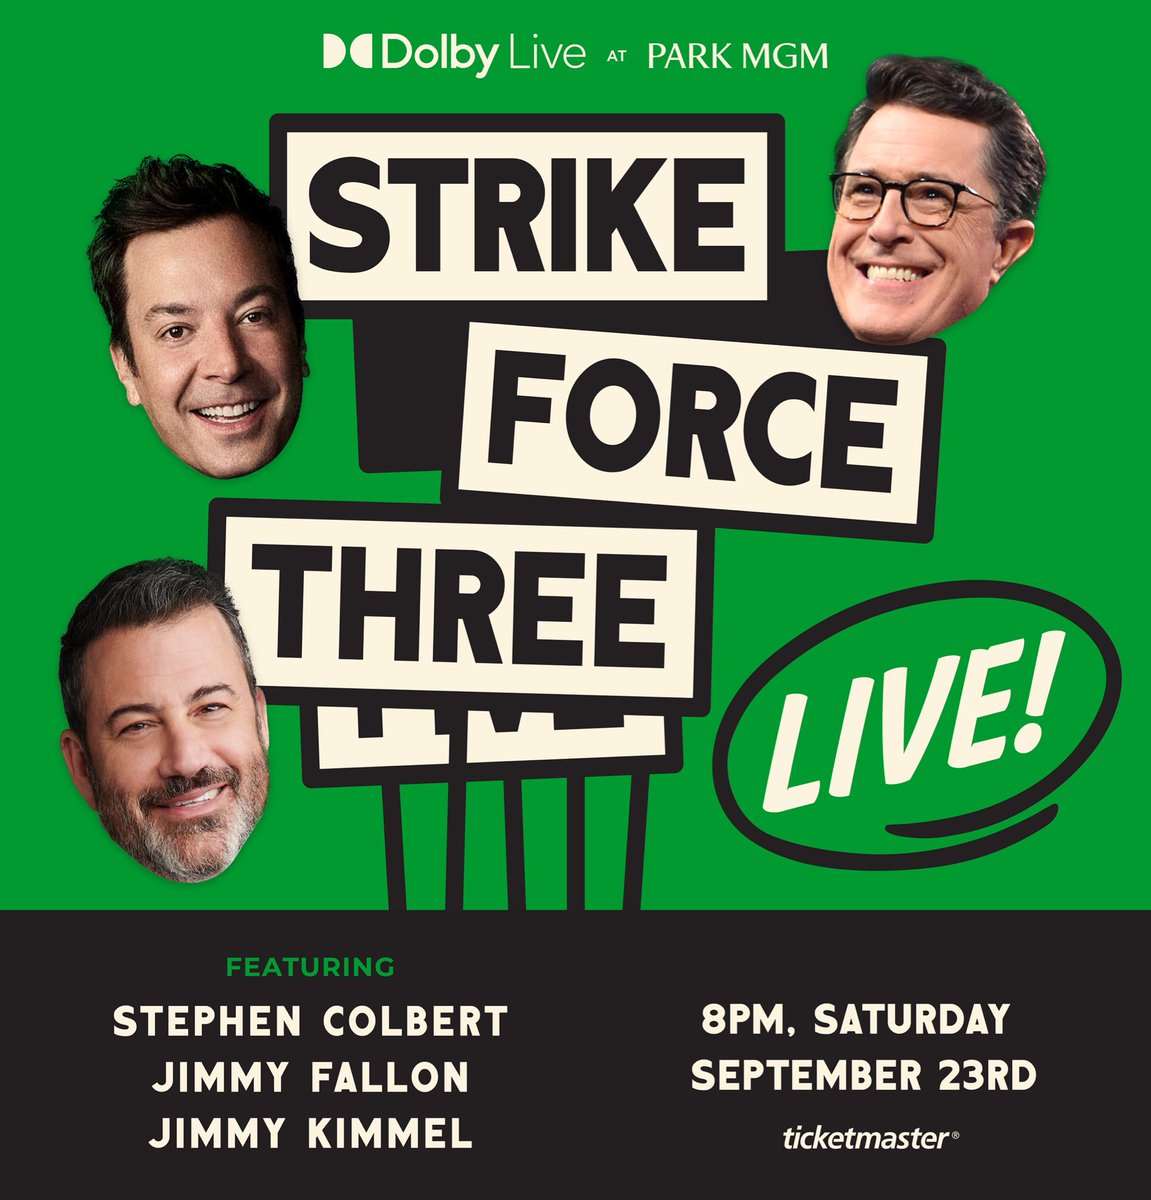 Tickets are now on sale for Strike Force Three LIVE! Join me, @JimmyFallon & @JimmyKimmel at @ParkMGM in Las Vegas on Saturday, Sep. 23! 🎟️👉 ticketmaster.com/strike-force-t…